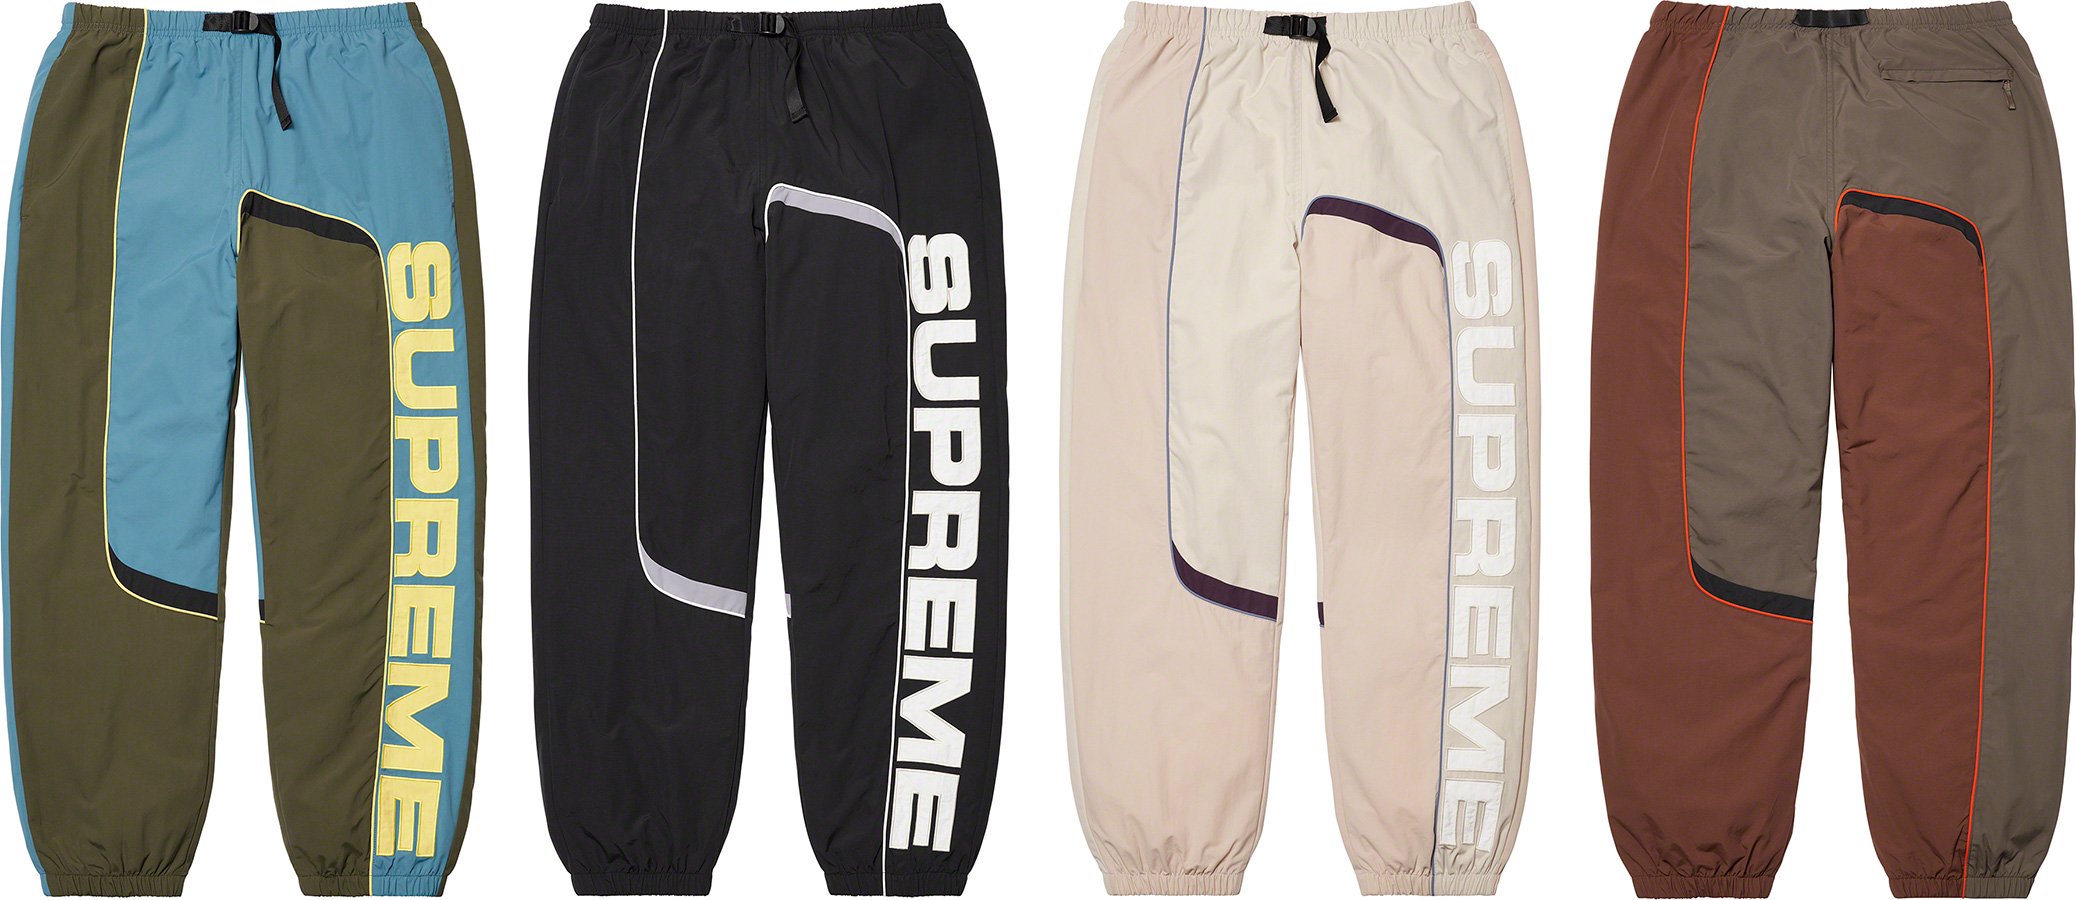 S Paneled Belted Track Pant - fall winter 2021 - Supreme